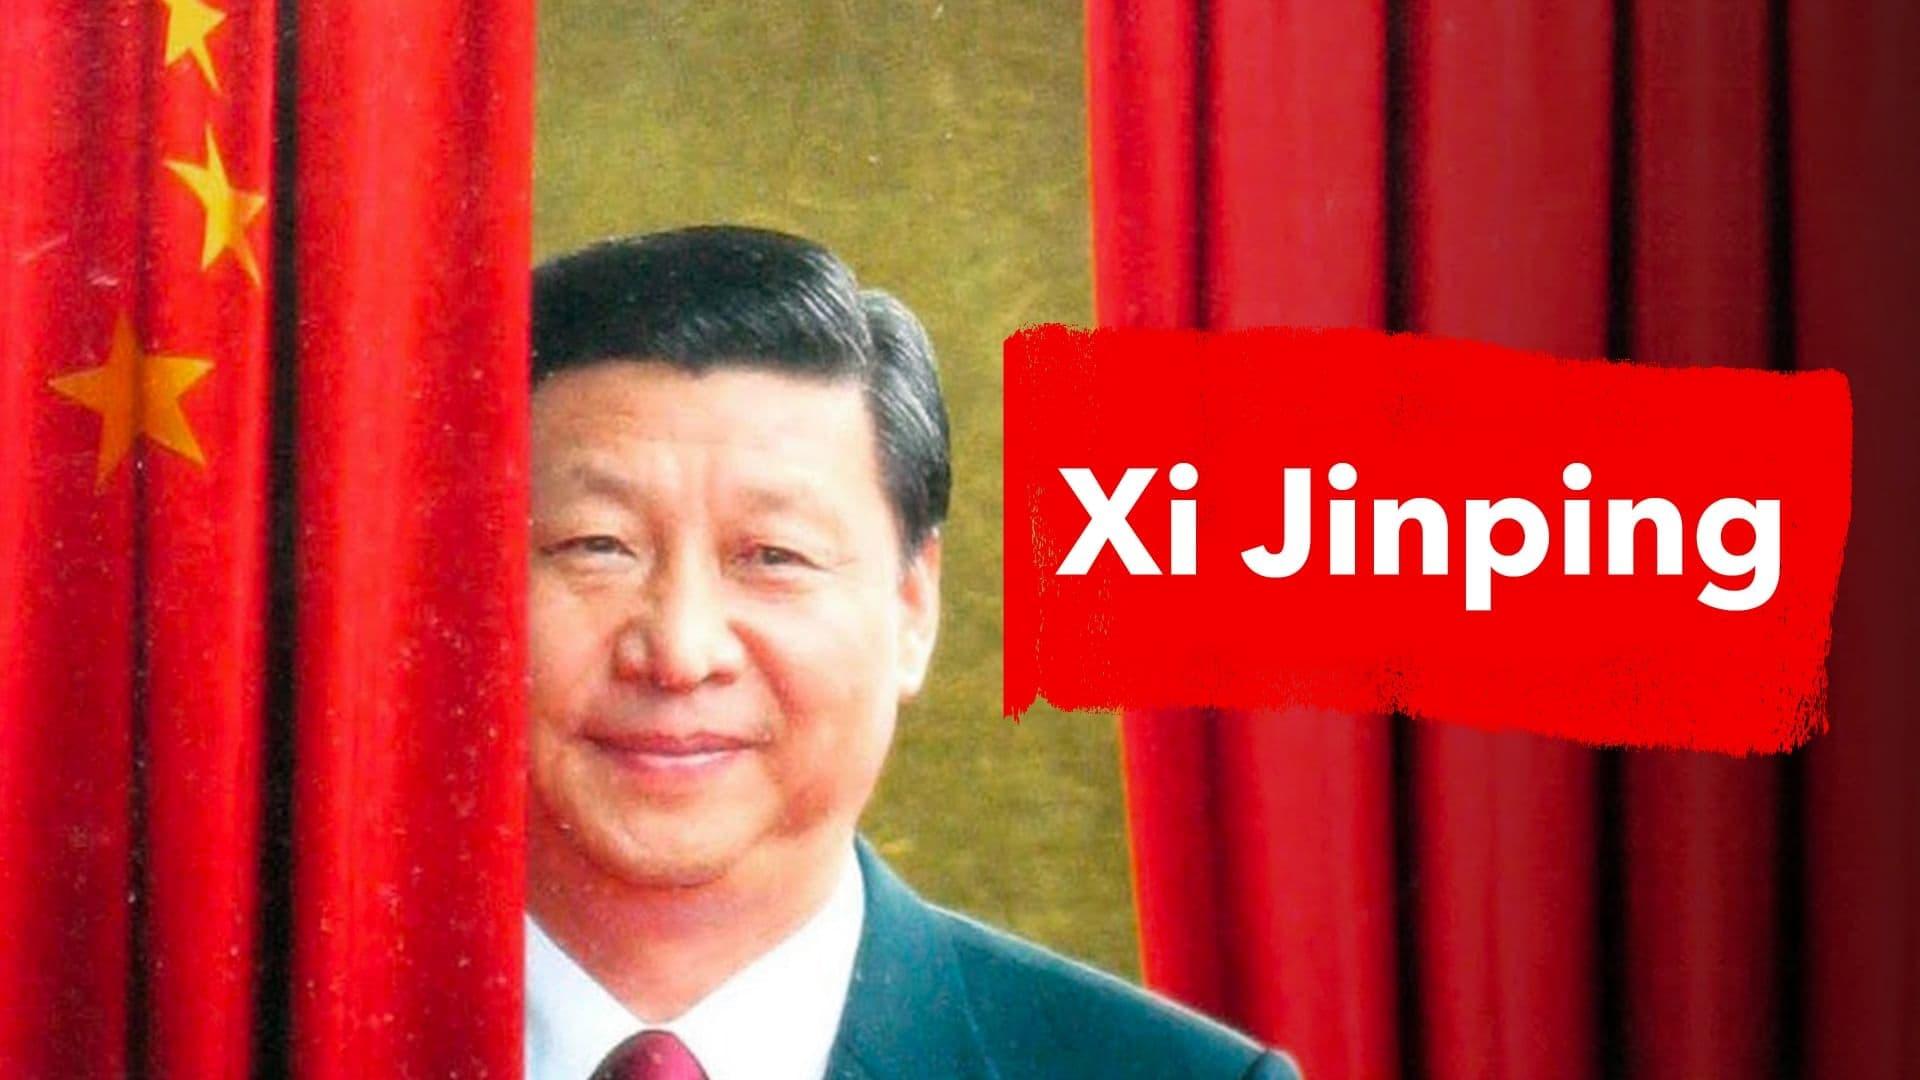 The New World of Xi Jinping backdrop